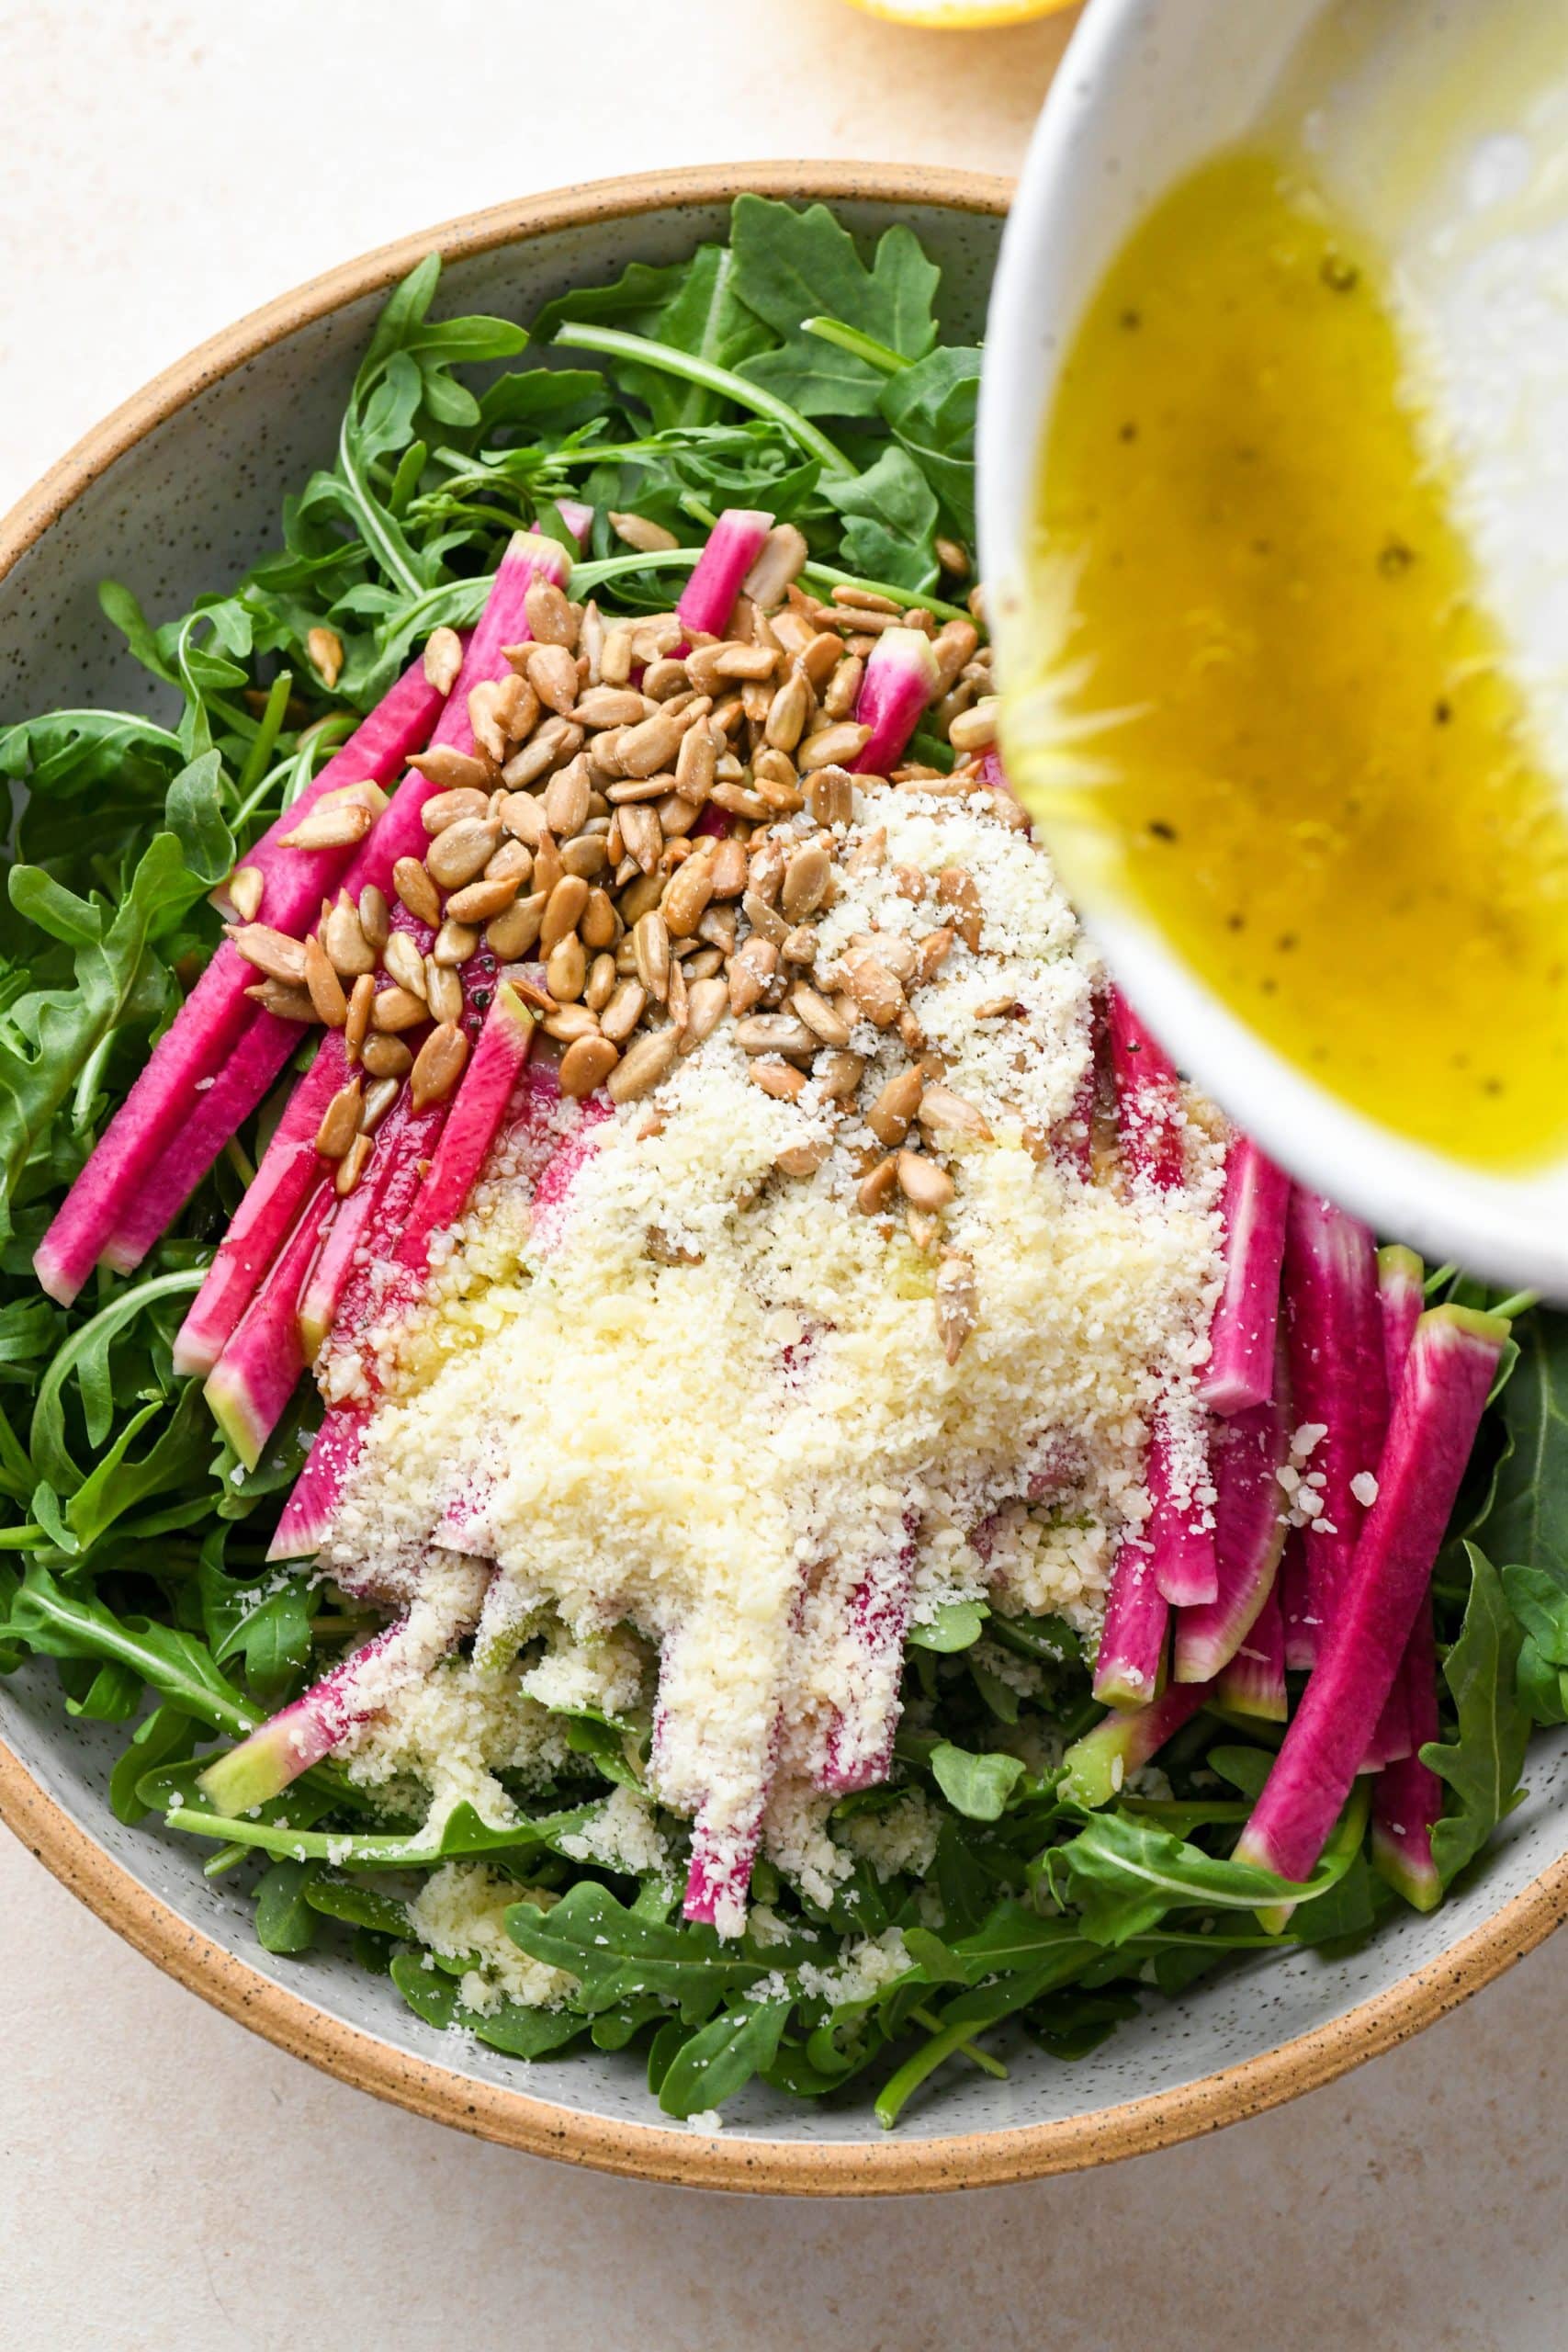 How to make Simple Arugula Salad: Pouring dressing over the salad.